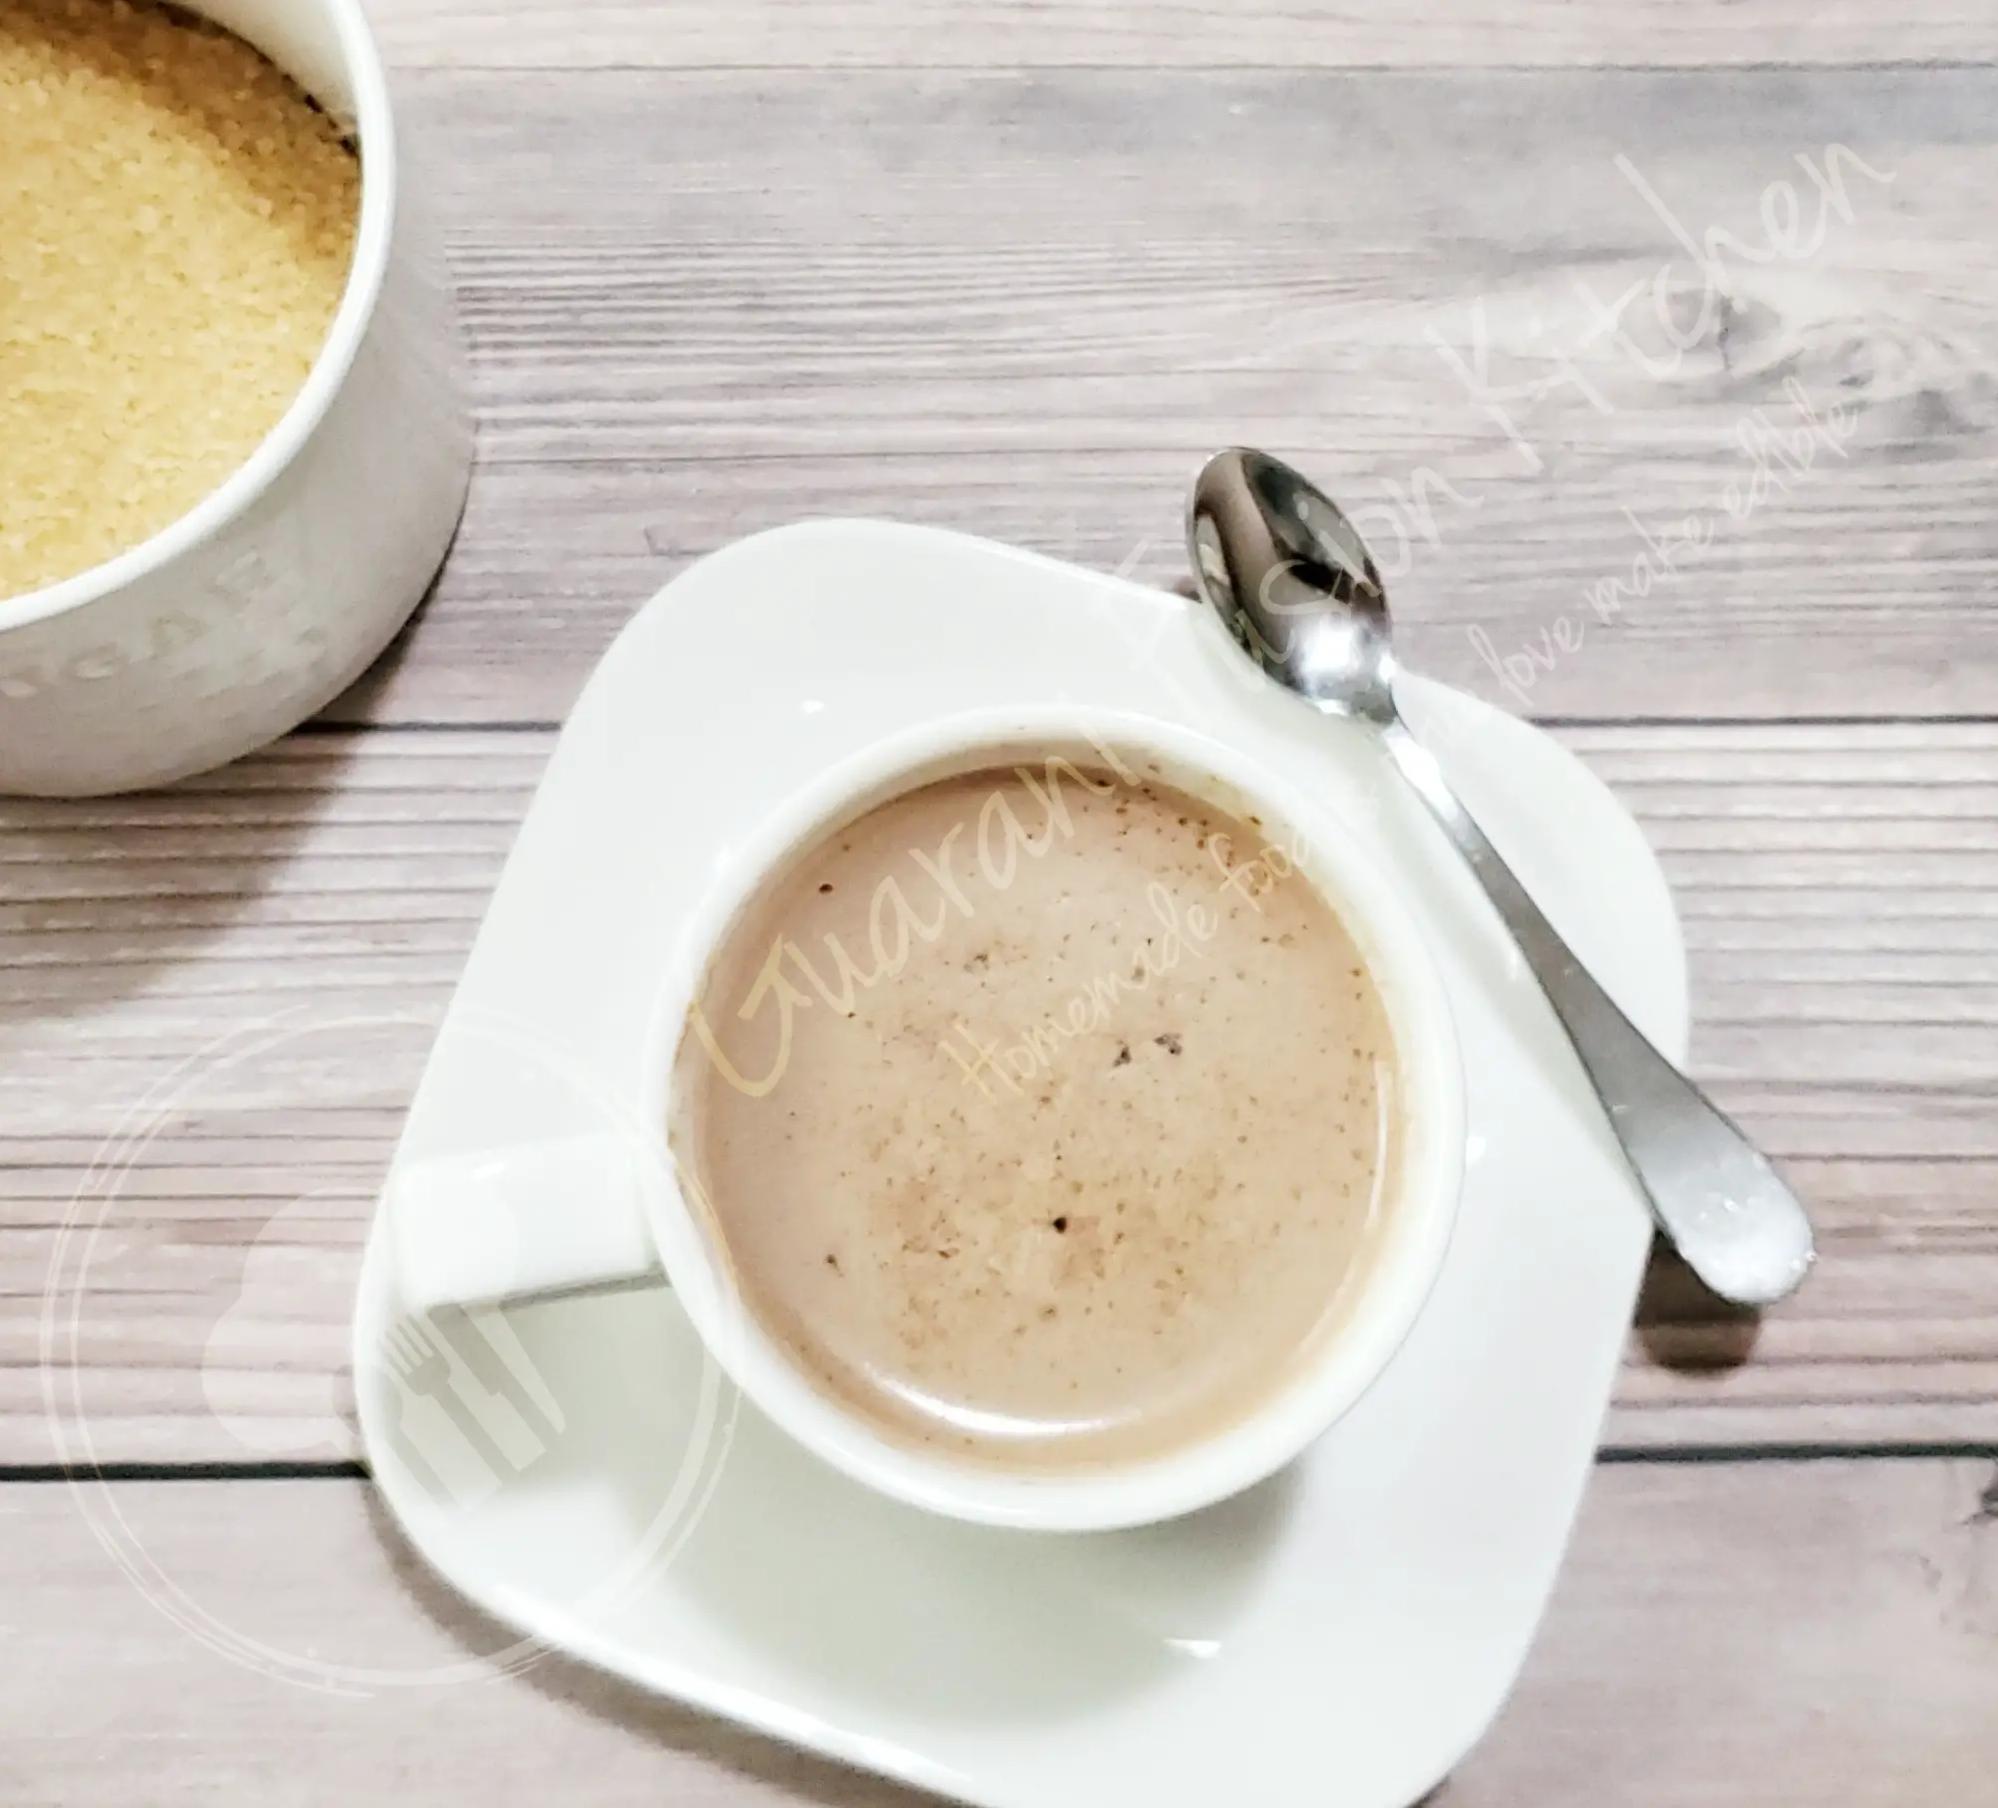  Add some creaminess to your coffee with this DIY mix